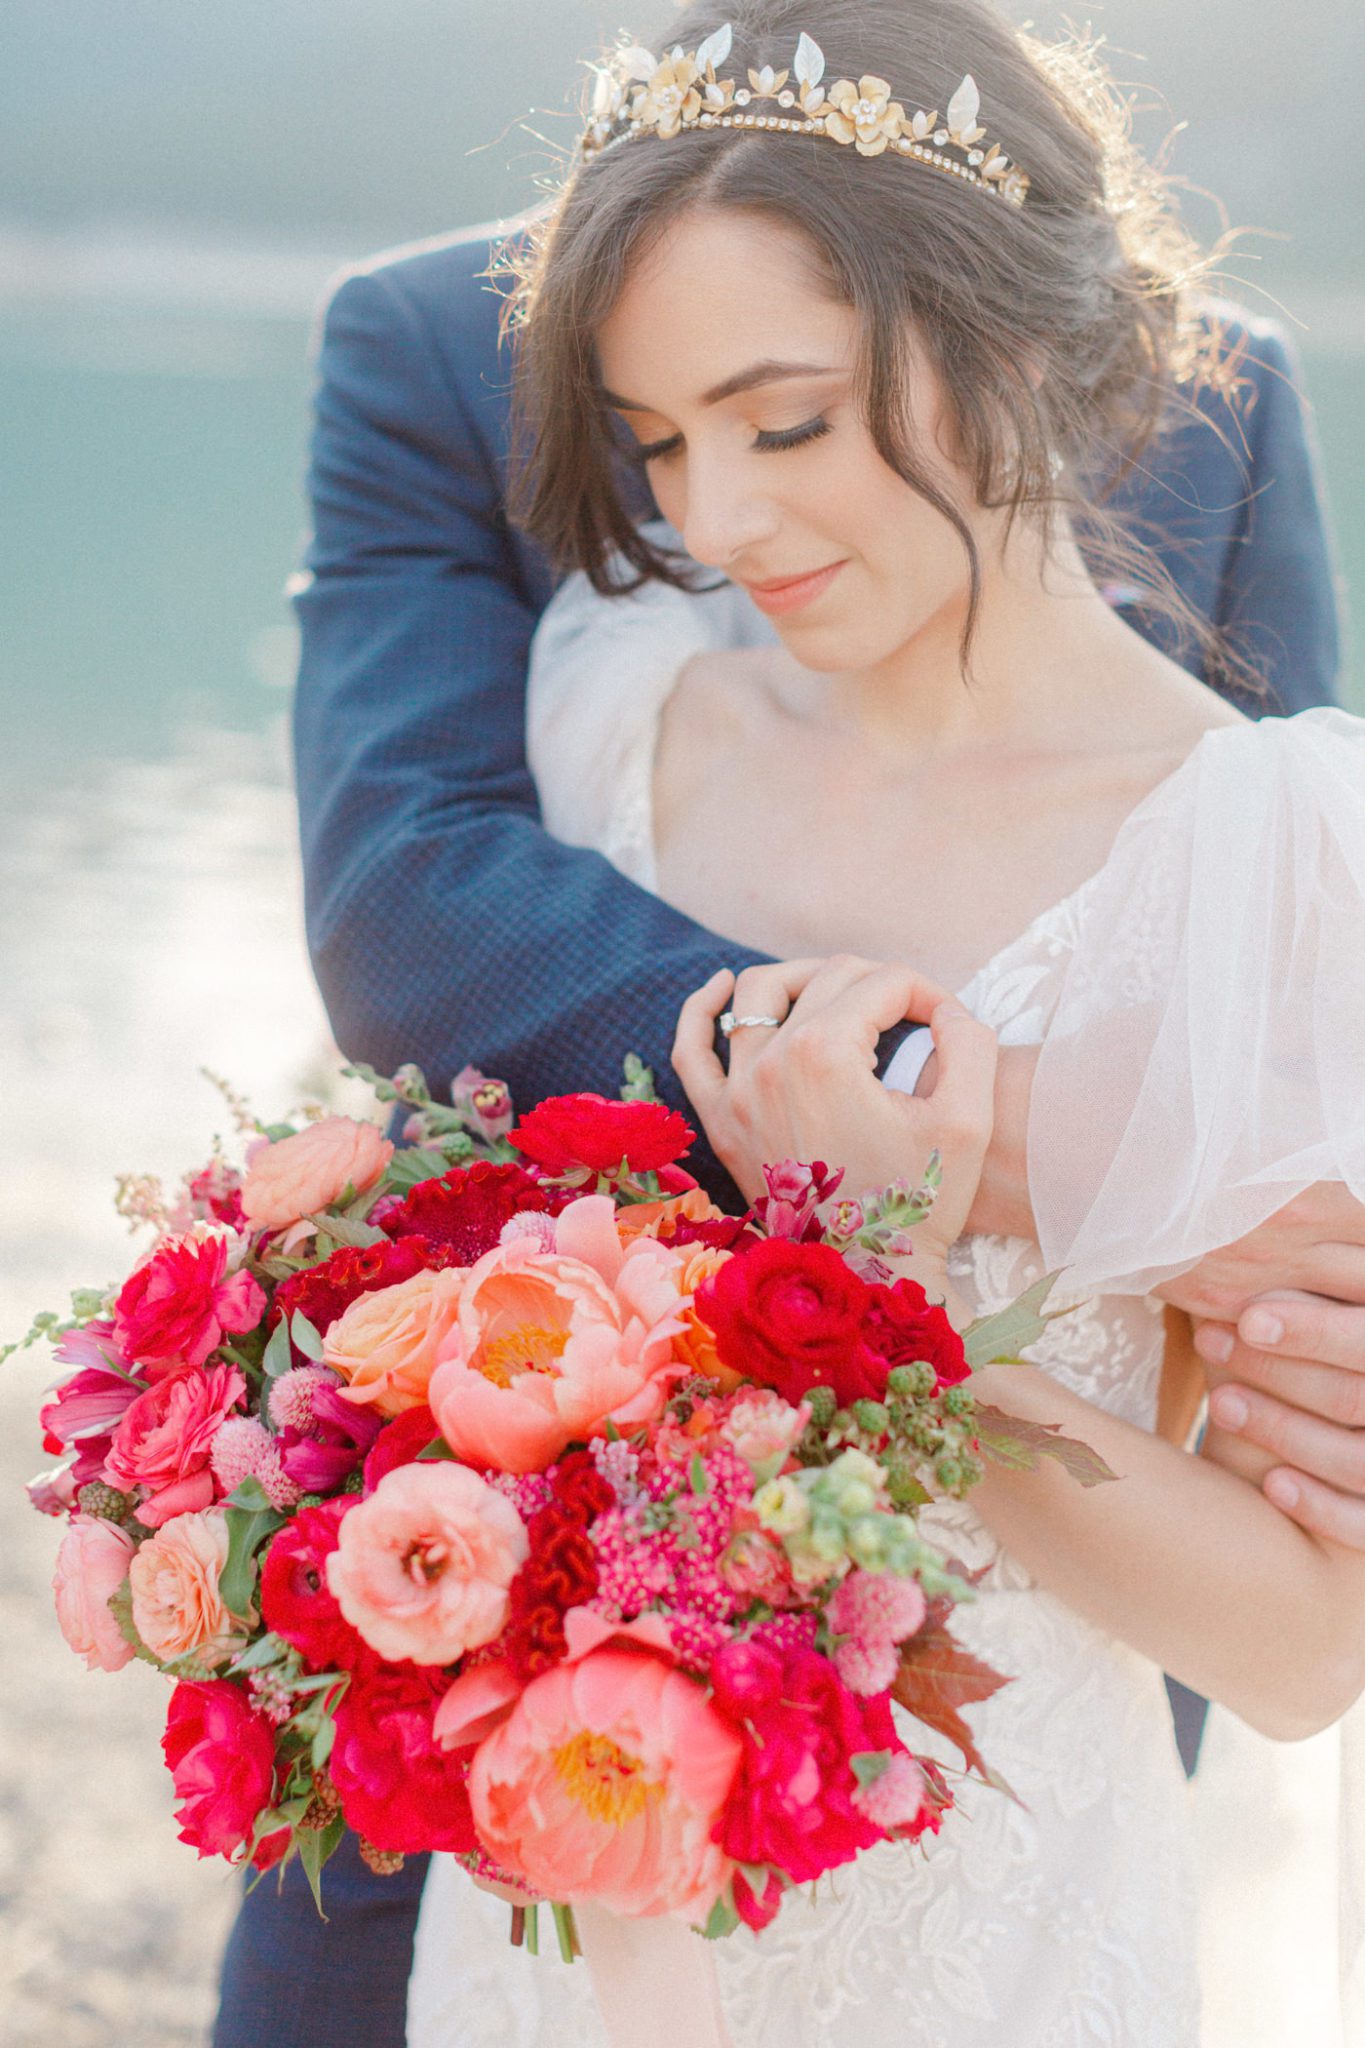 The Dreamiest Lakeside Wedding Inspiration with Vibrant Florals and Picturesque Mountain Views